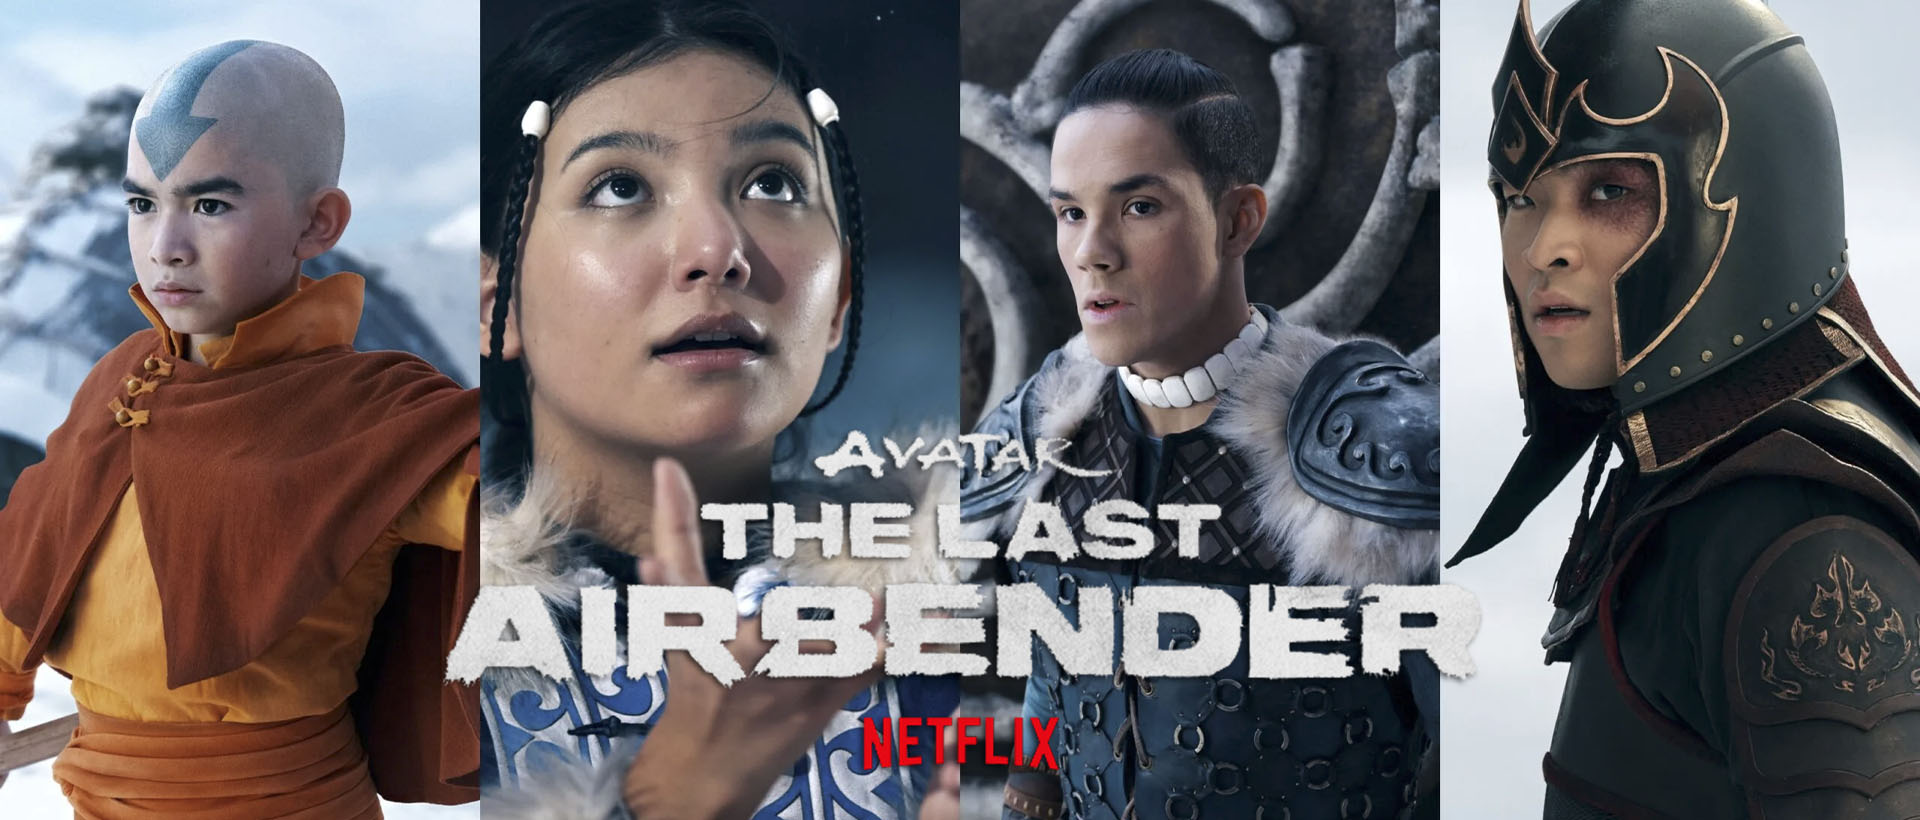 1706187849 621 The New Trailer of Avatar the Last Airbender Series Has